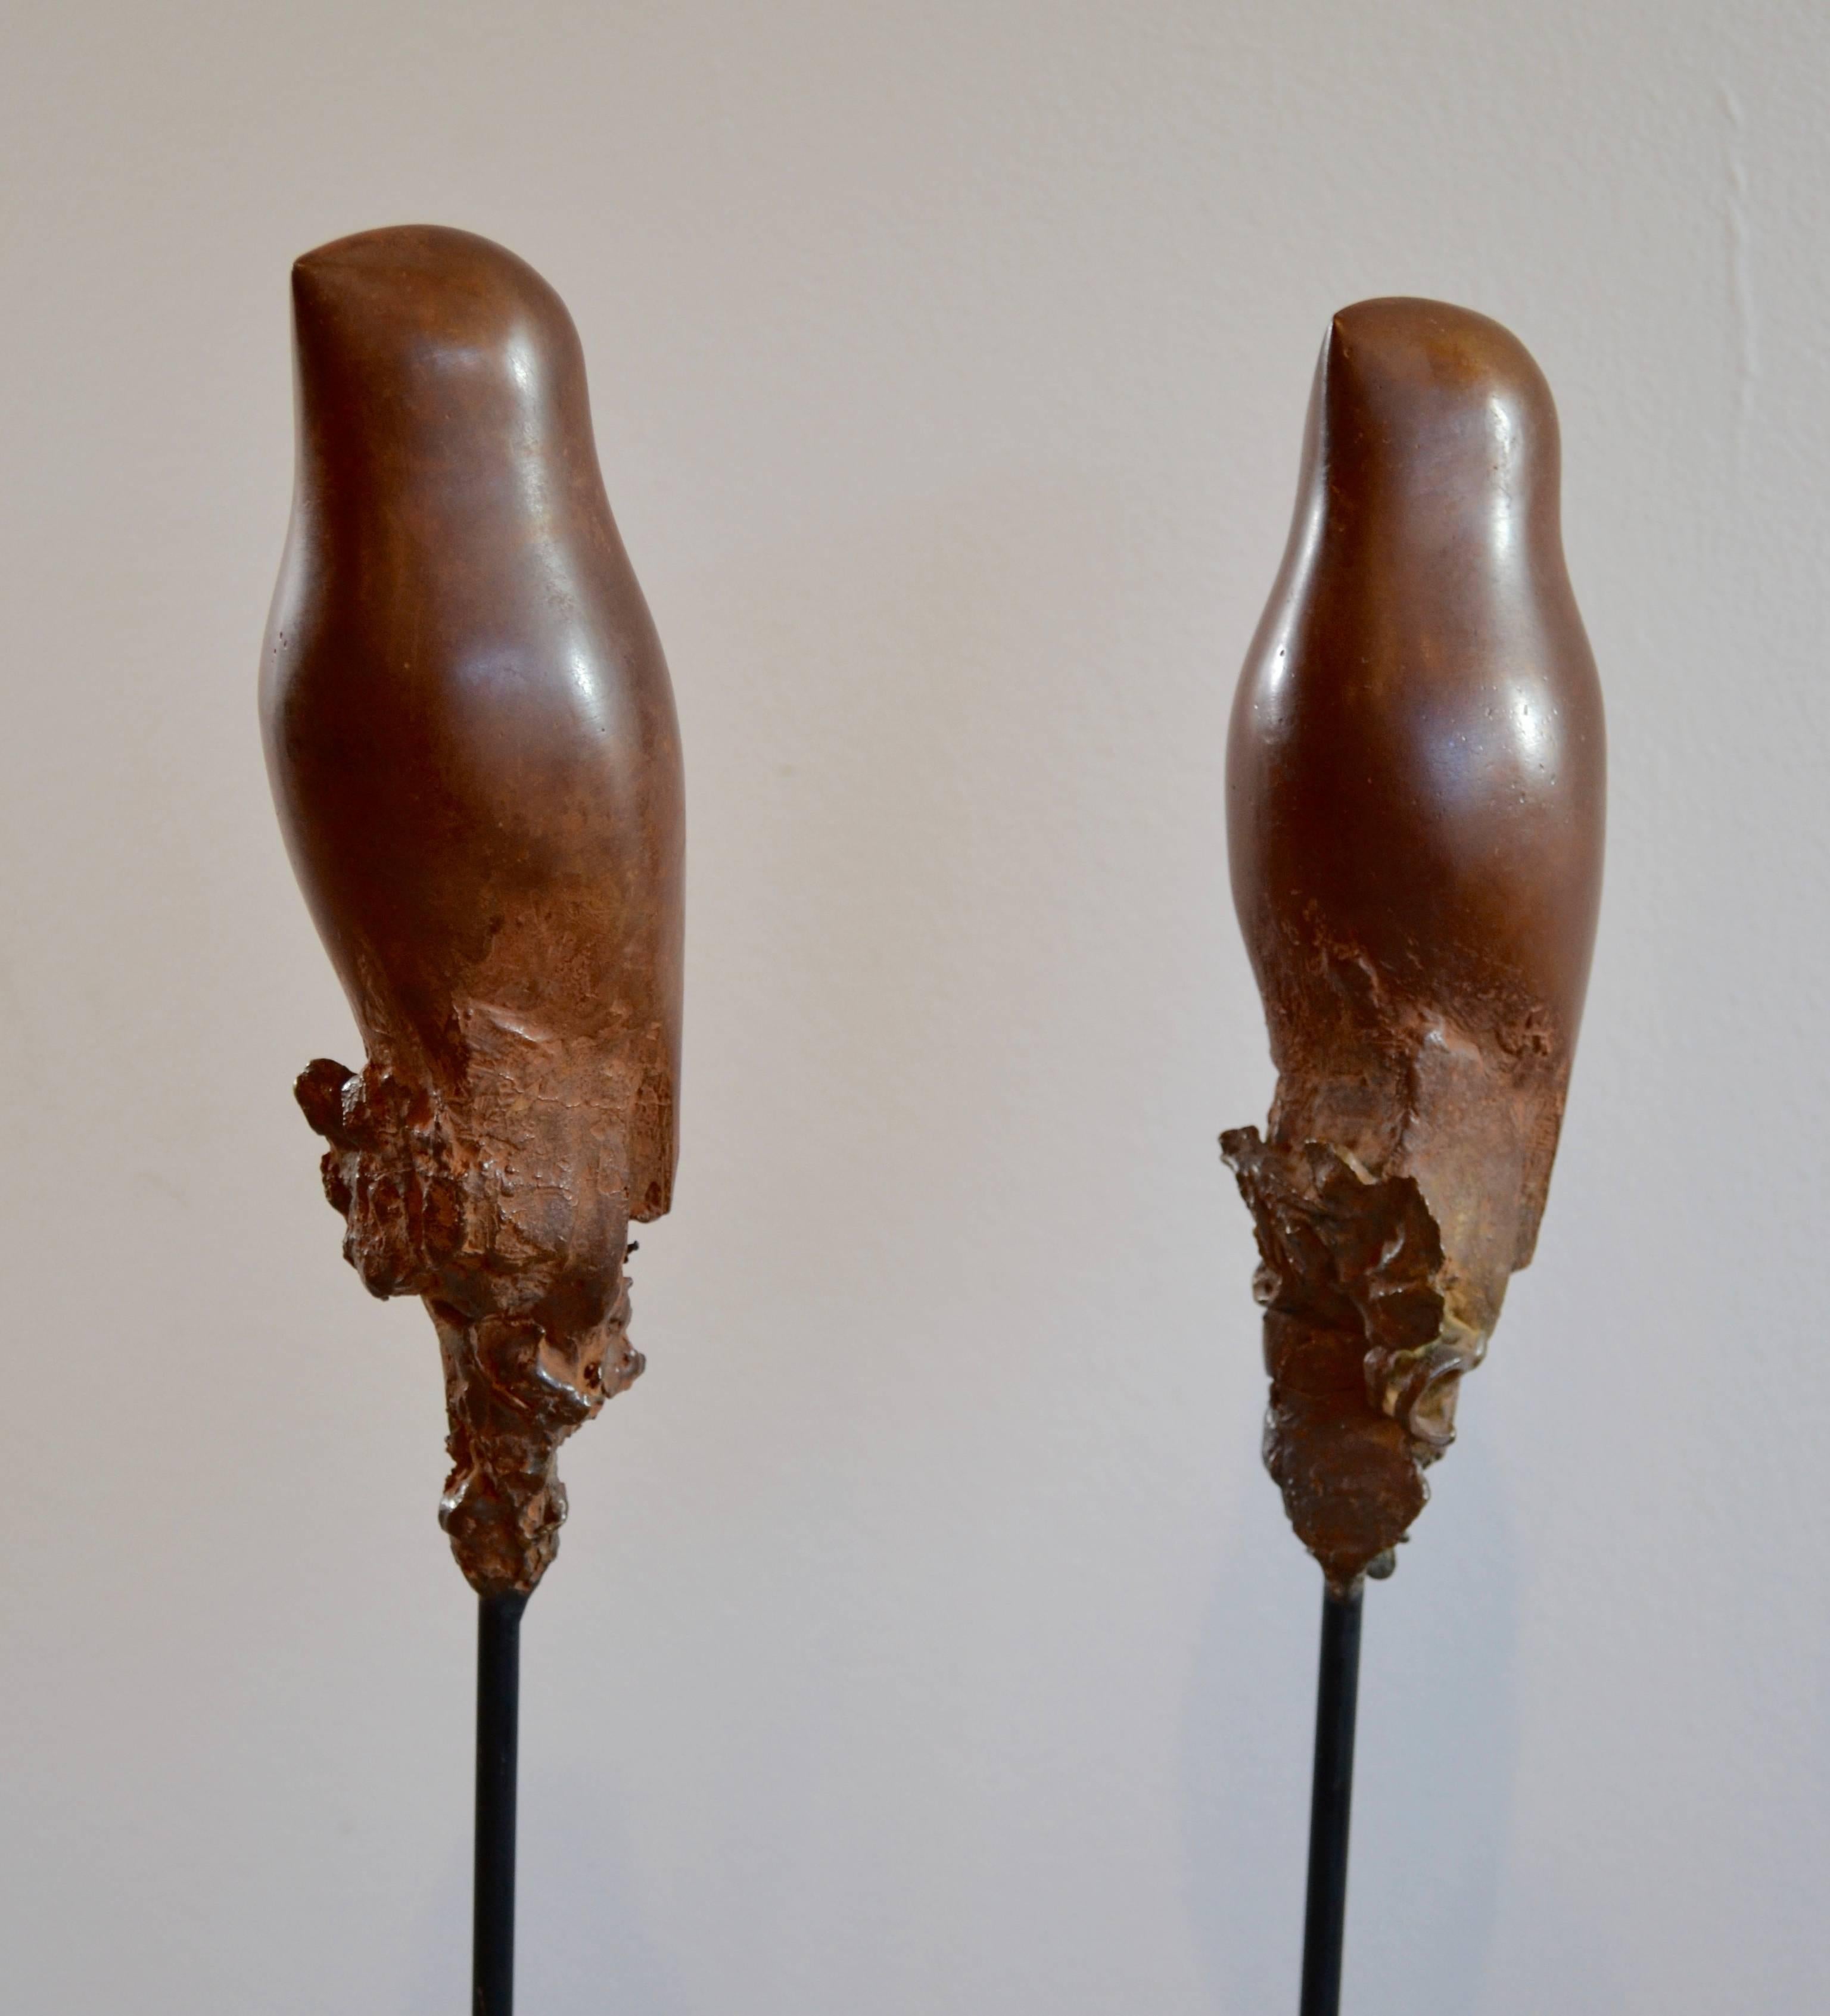 Pair of suspended bronze birds mounted on steel rods. Highly finished bronze with a beautiful patina. Each bird is hand-crafted by the artist, Sharon Wandel, elected member of the National Academy of Design NYC, 1994. Please note the size of the